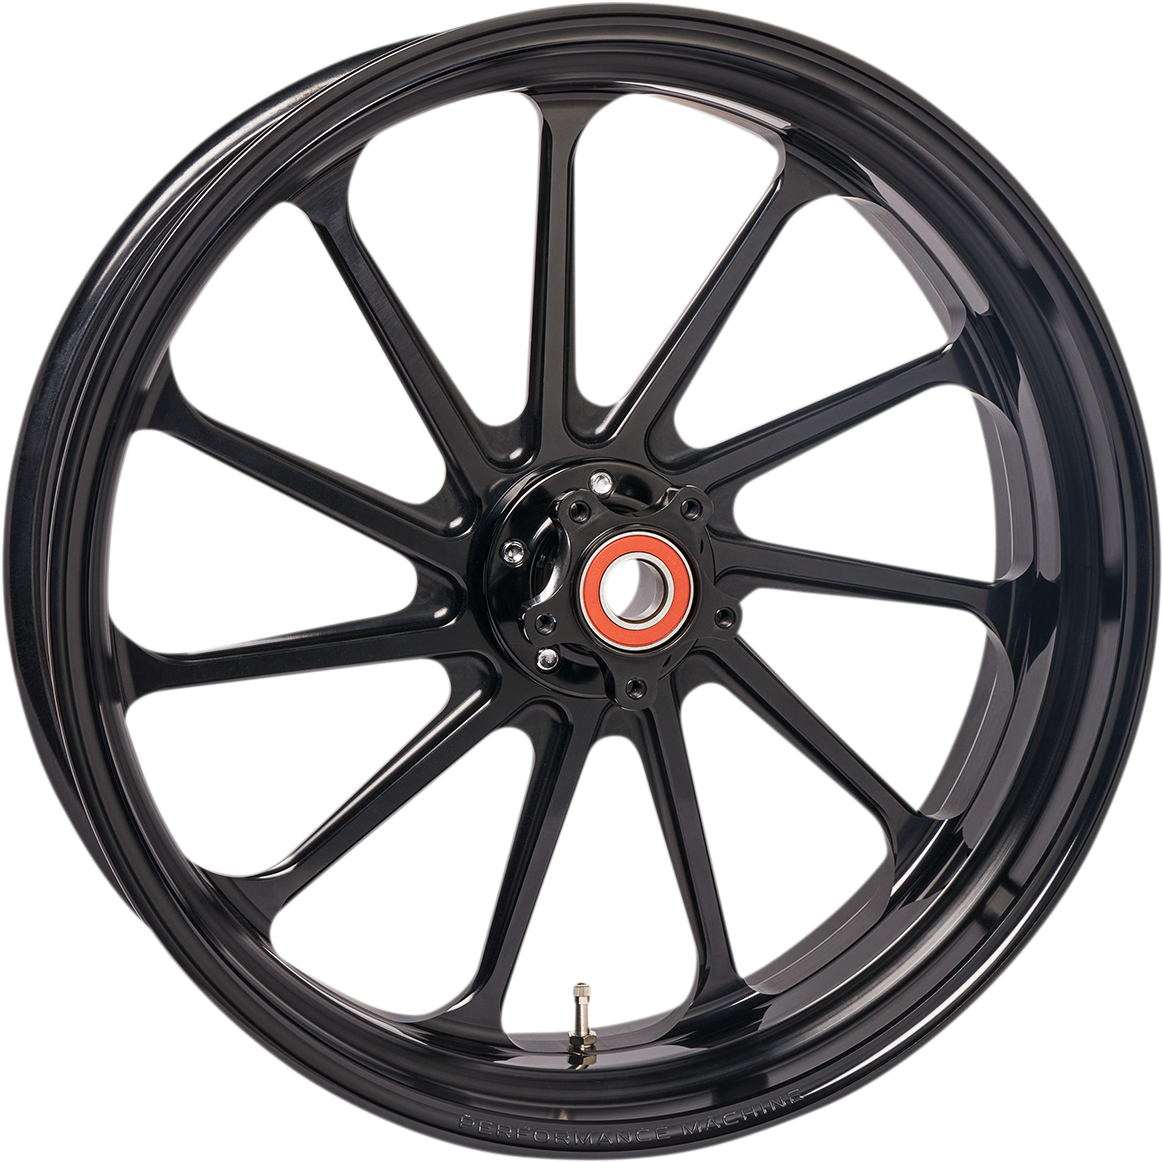 Wheel - Assault - Single Disc - Rear - Black Ops™ - 18"x5.50" - Without ABS